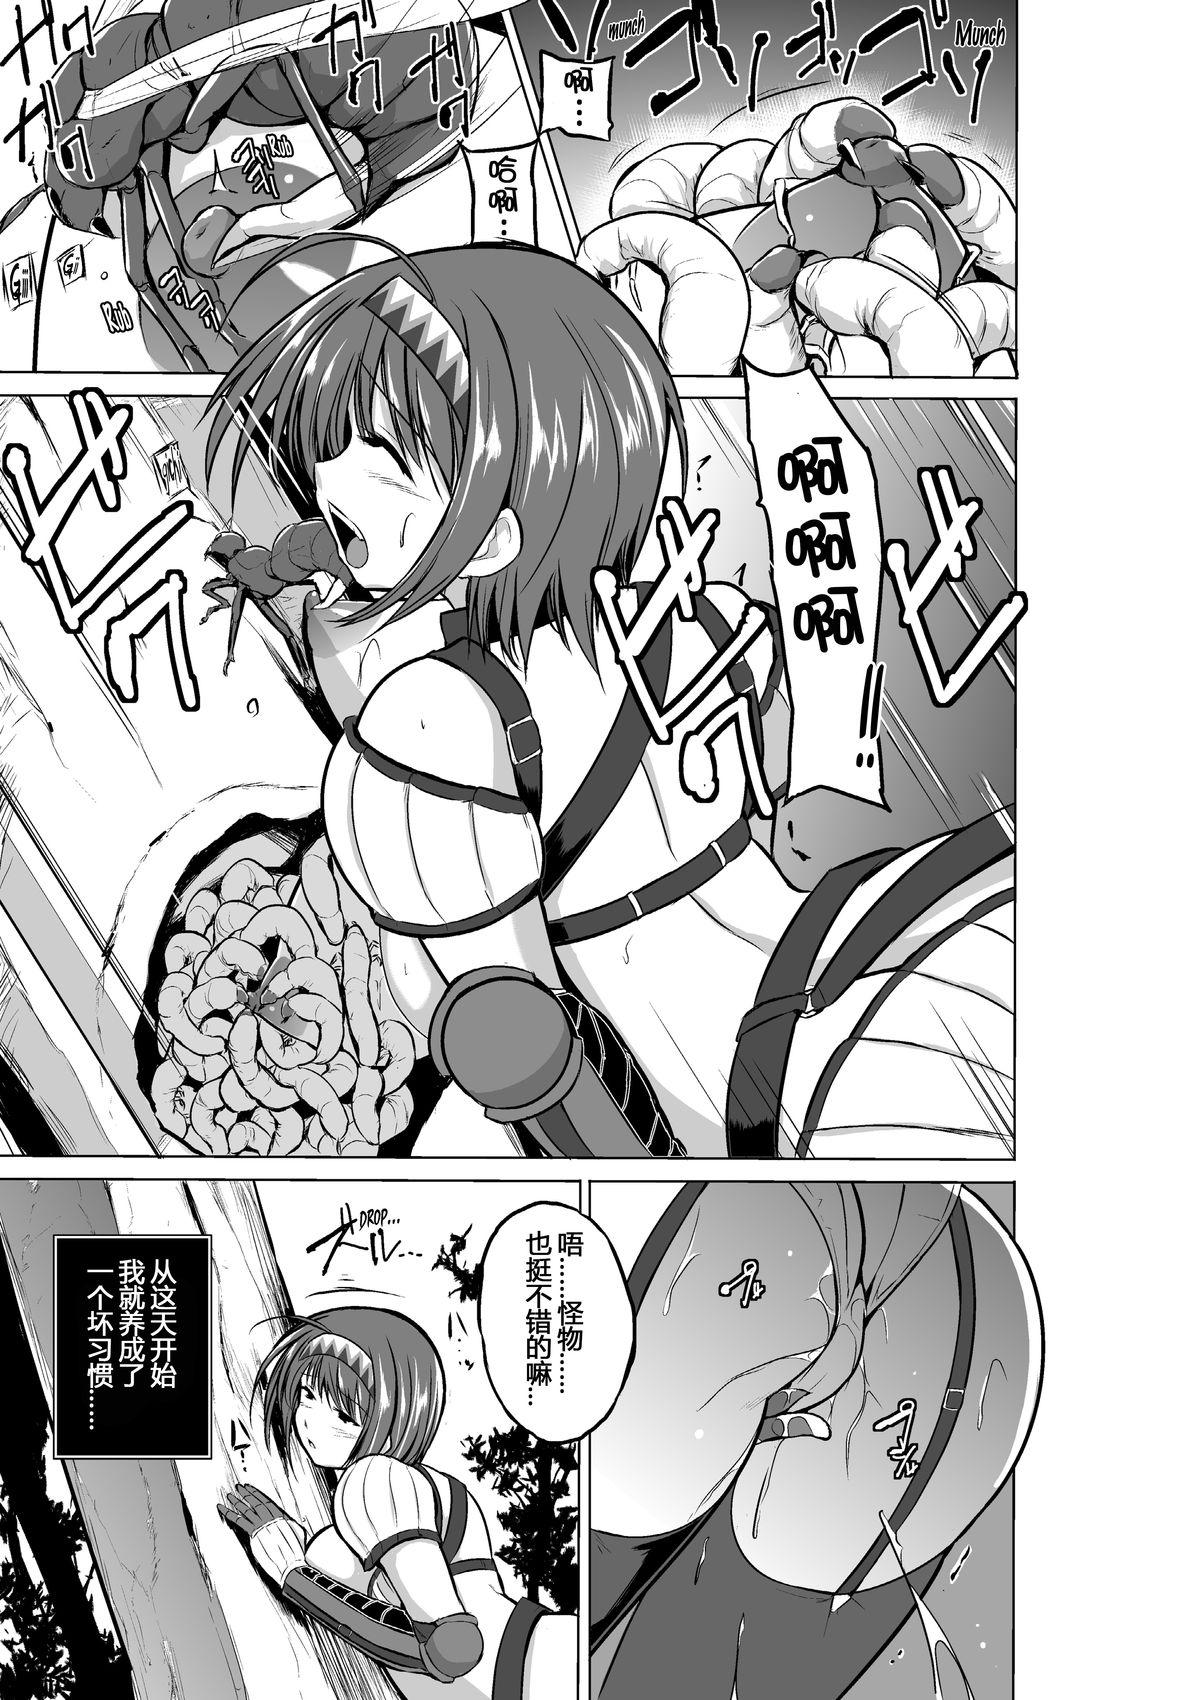 Gay Baitbus Dungeon Travelers - Chie no Himegoto - Toheart2 Step - Page 9